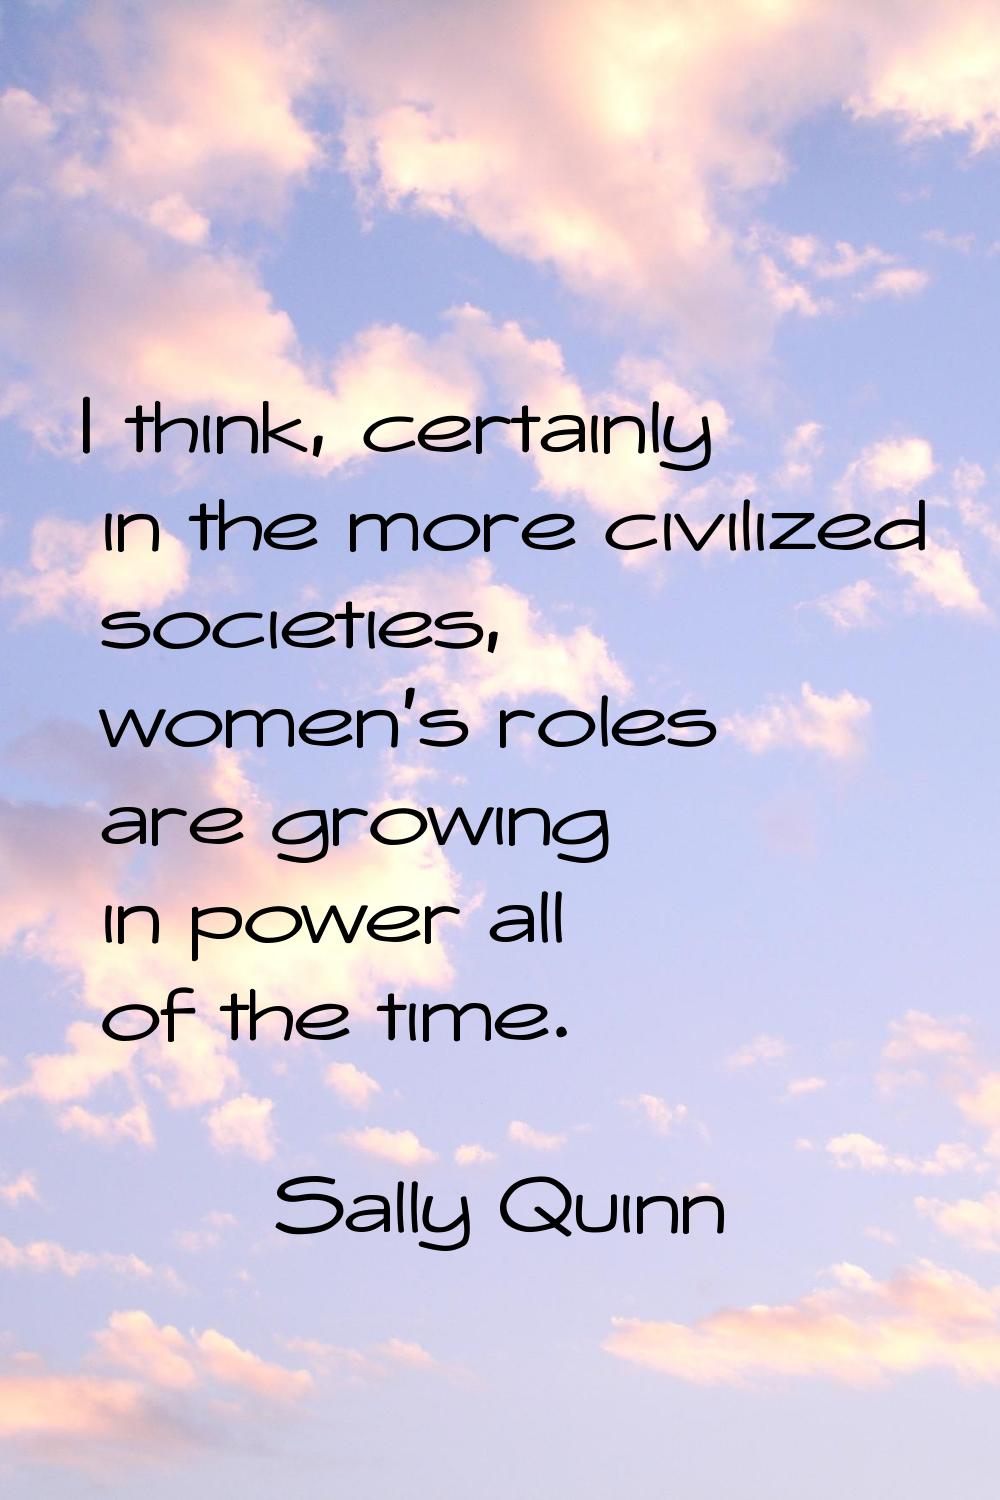 I think, certainly in the more civilized societies, women's roles are growing in power all of the t